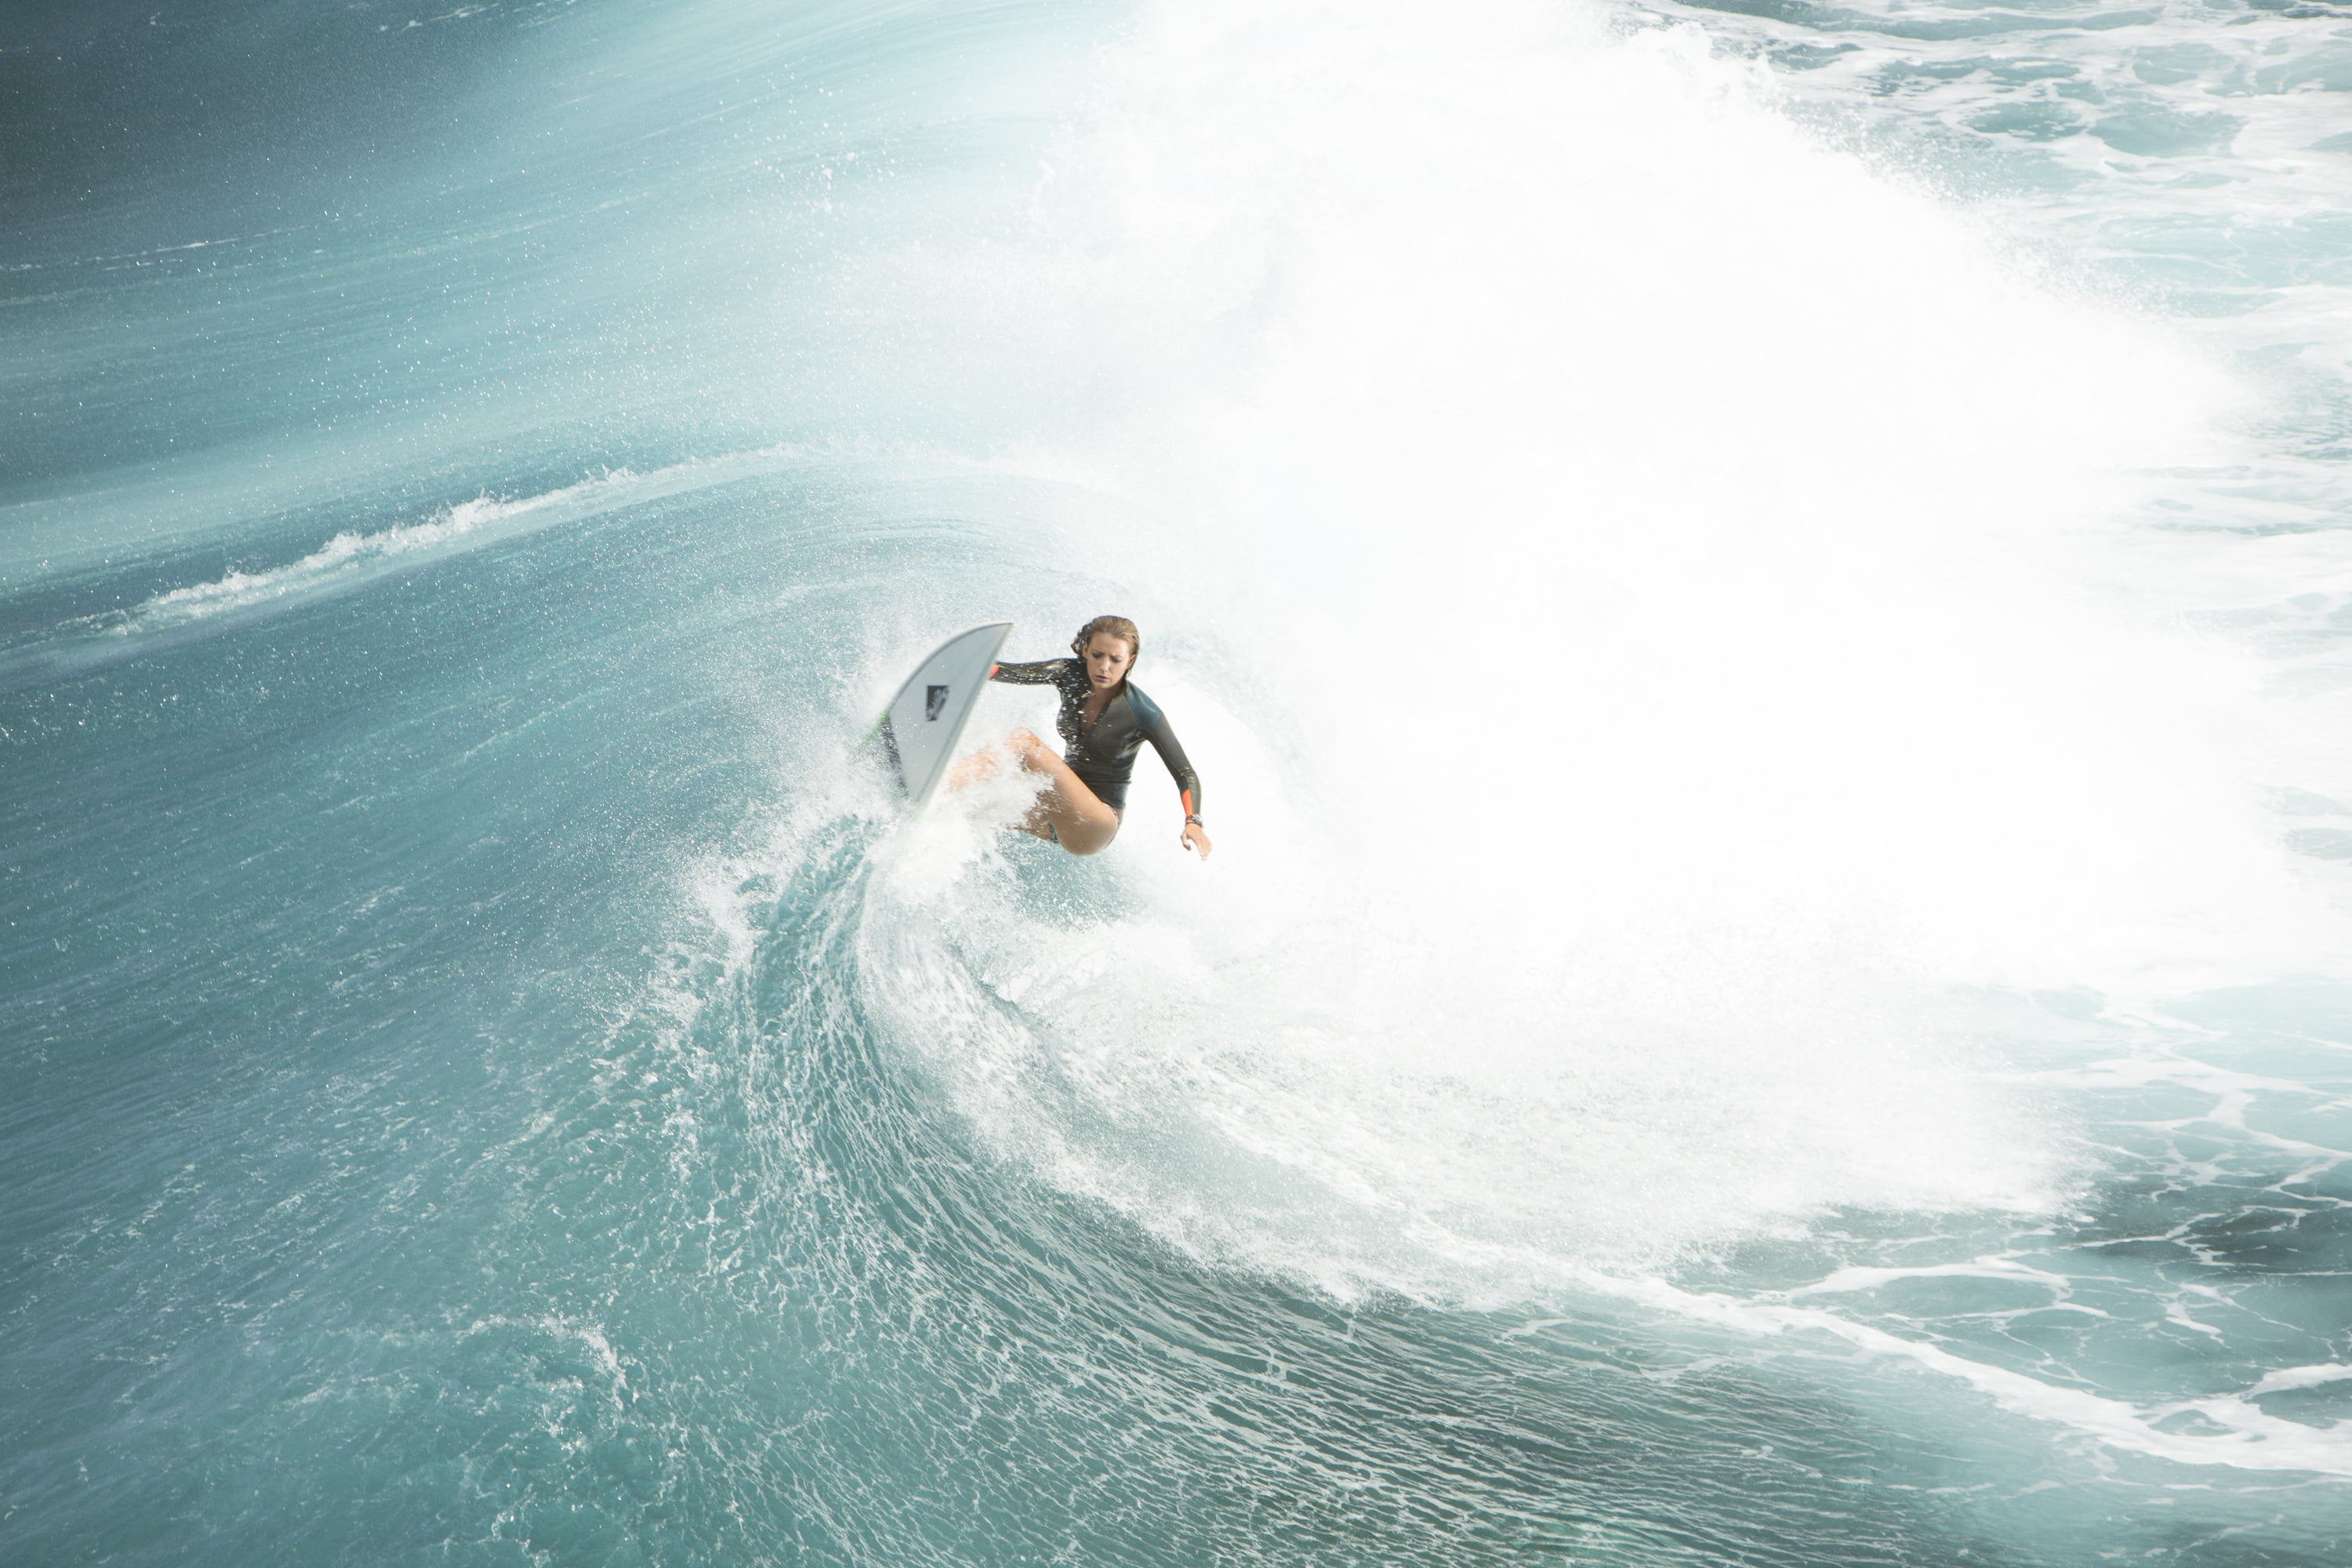 photo of woman surfing